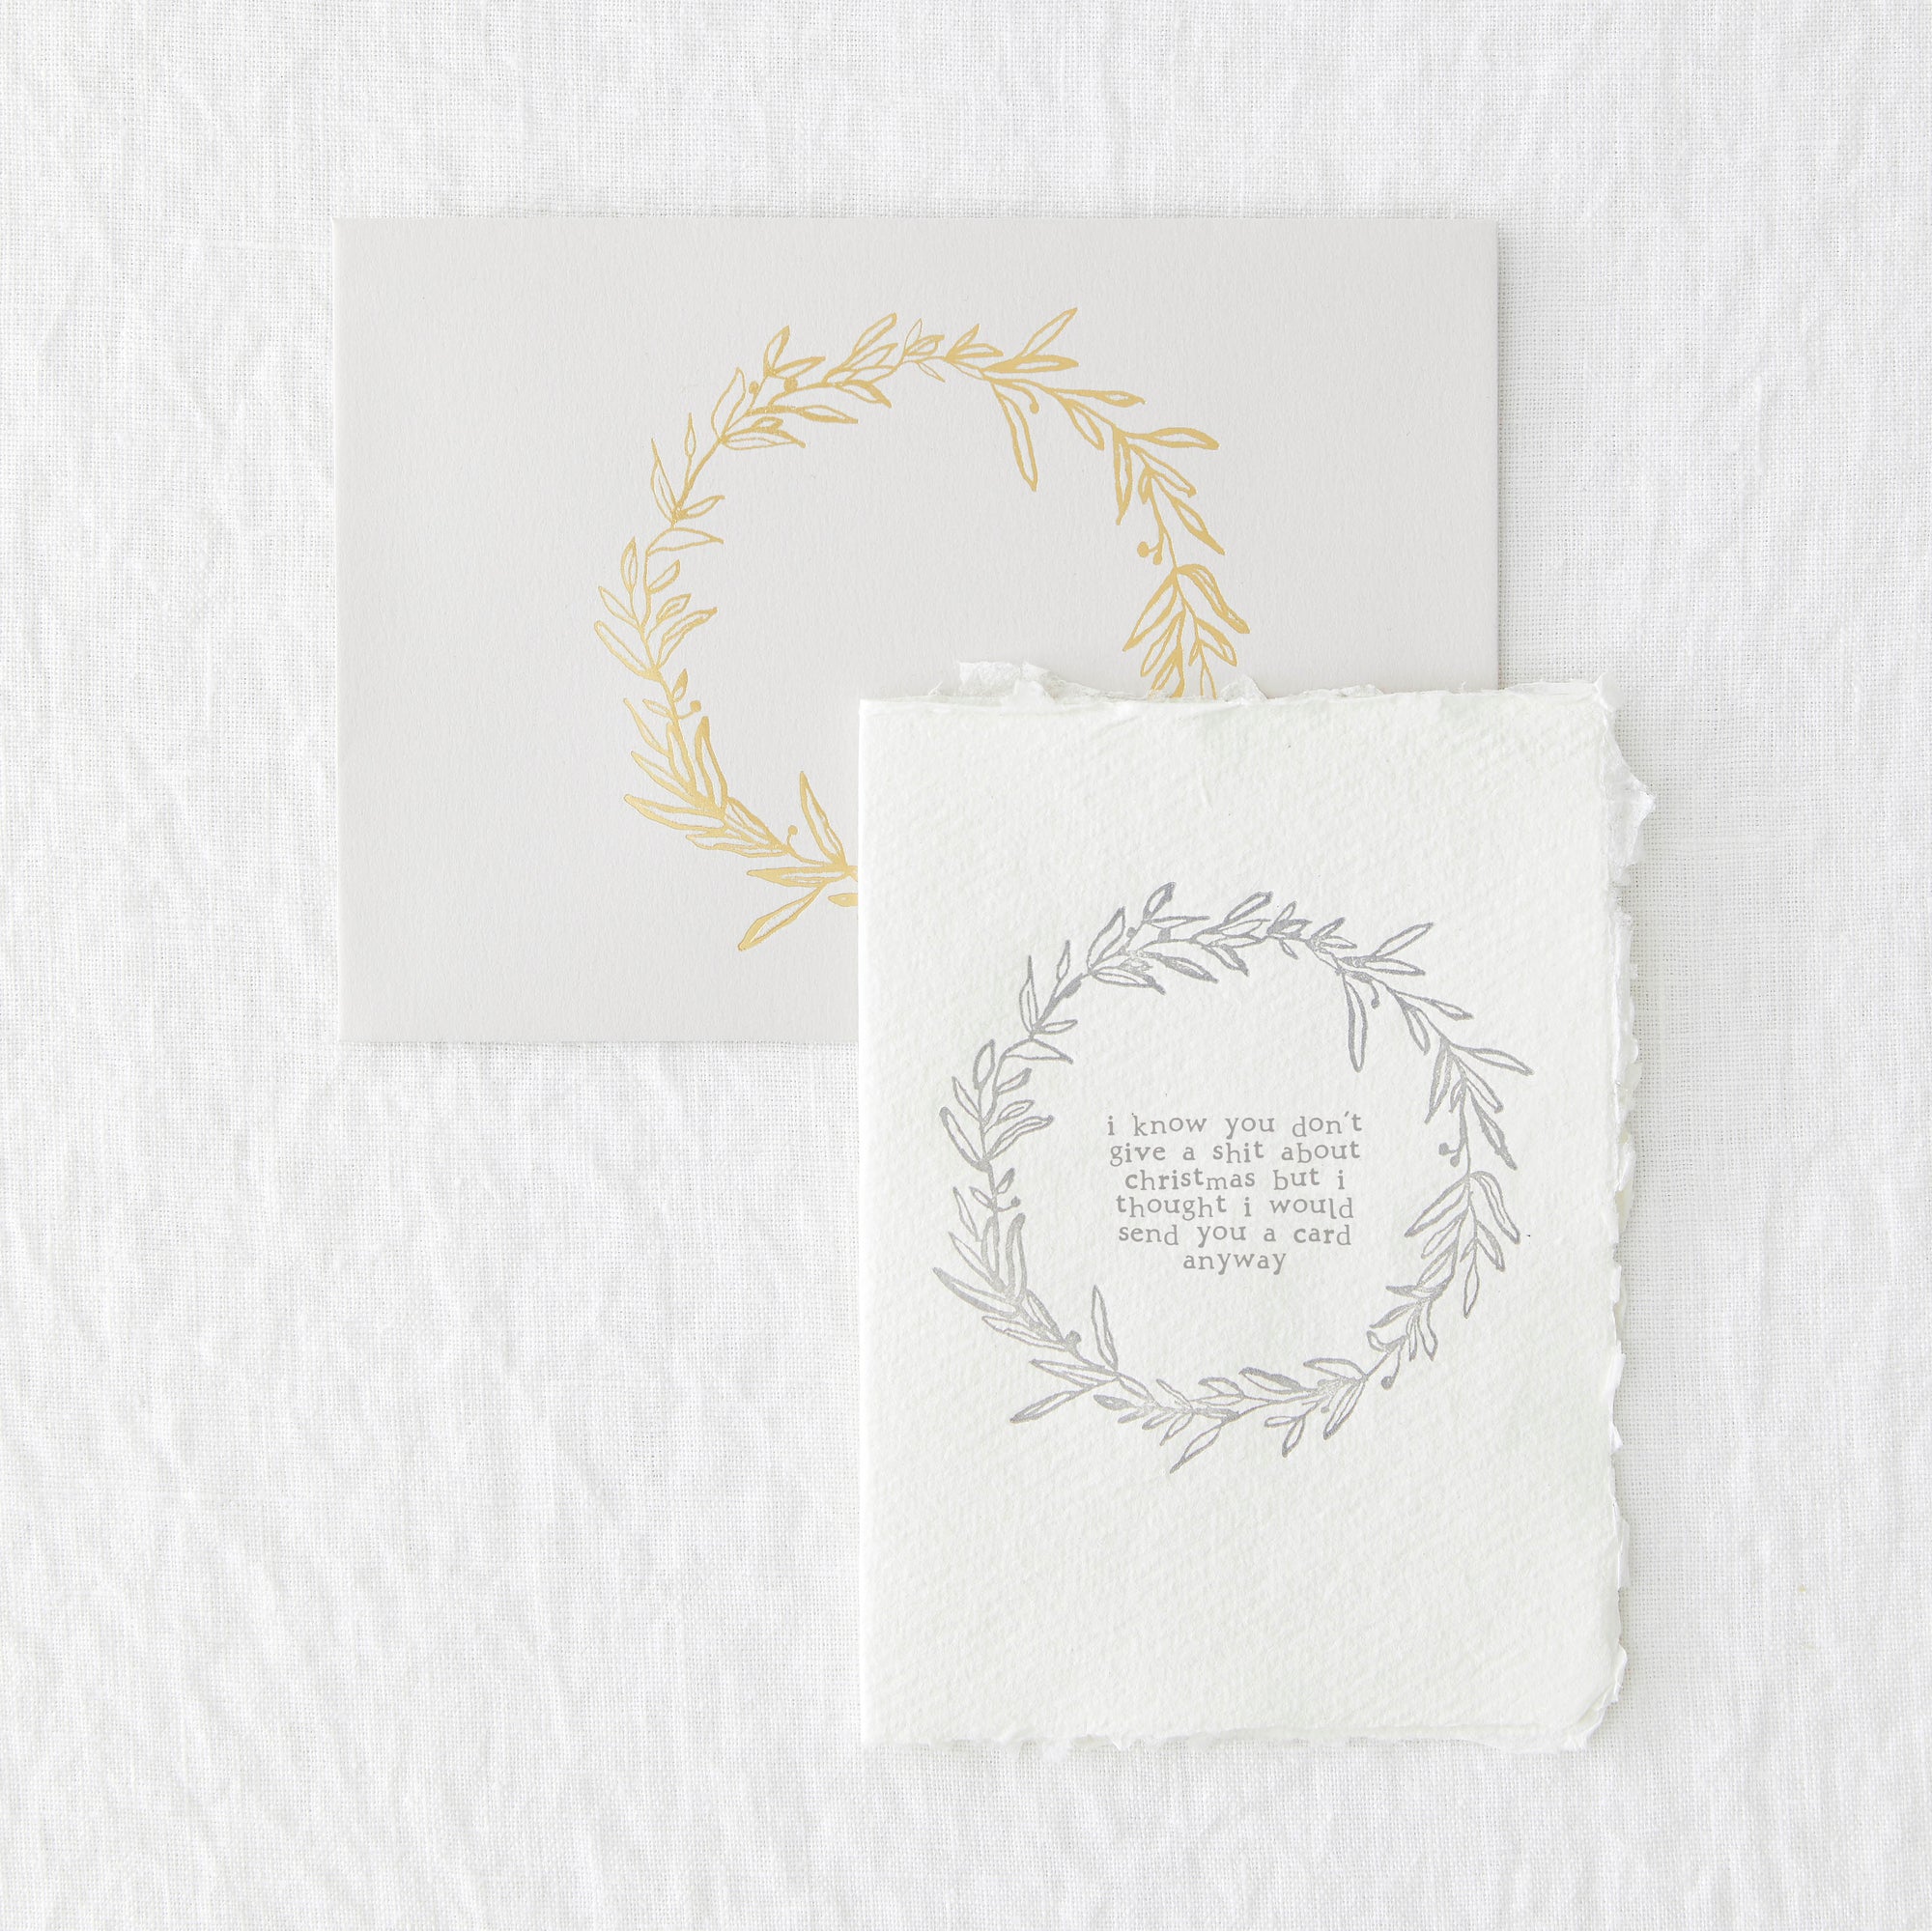 An image of a letterpressed christmas greetings card and envelope. The light grey envelope has a ring of gold foliage in the centre and the card has teh same but printed in grey with the words in the centre 'I know you don't give a shit about christmas but I thought I would send you a card anyway'.